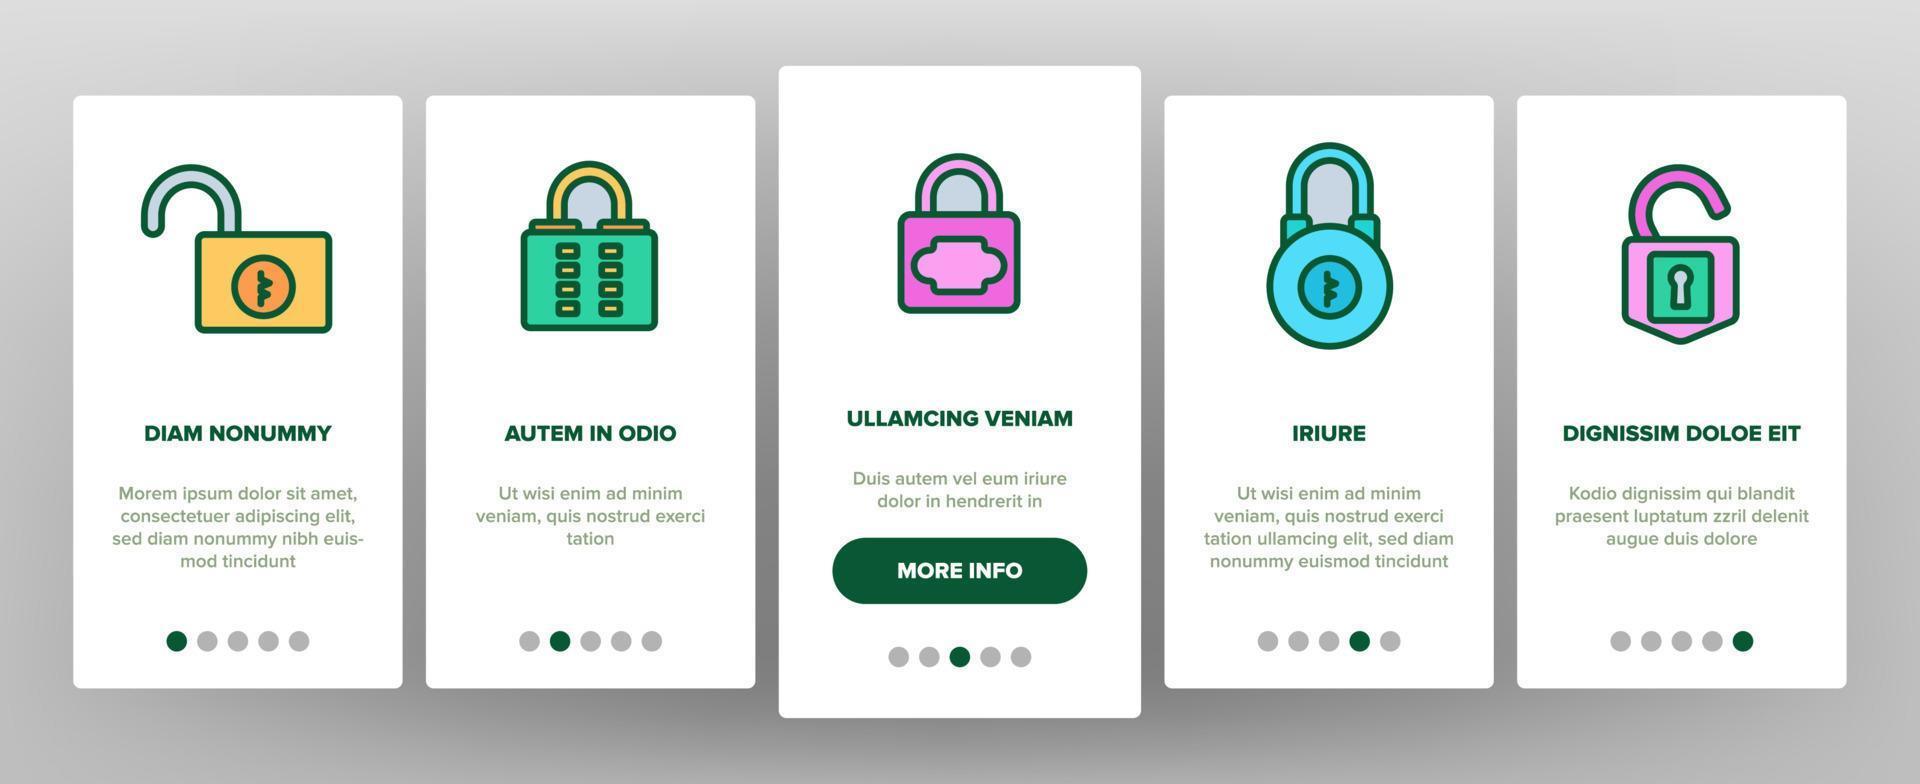 Padlock Security Tool Onboarding Icons Set Vector